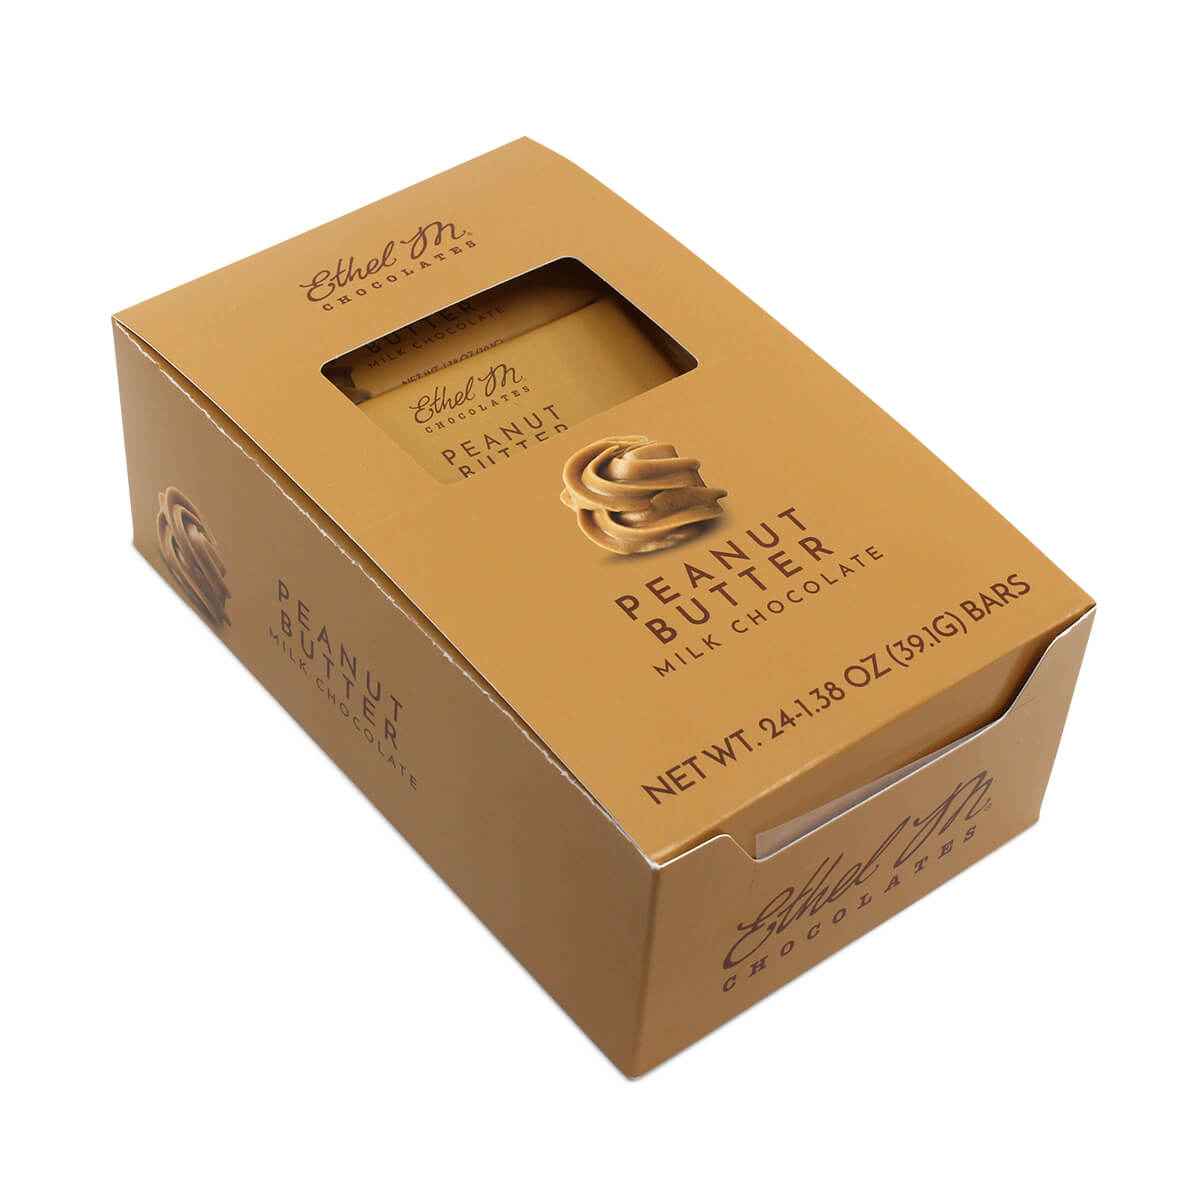 Delight on our Ethel M Chocolates Rich and Flavorful Peanut Butter Milk Chocolate Bar. It can be purchased individually, in an 8-pack or in box of 24